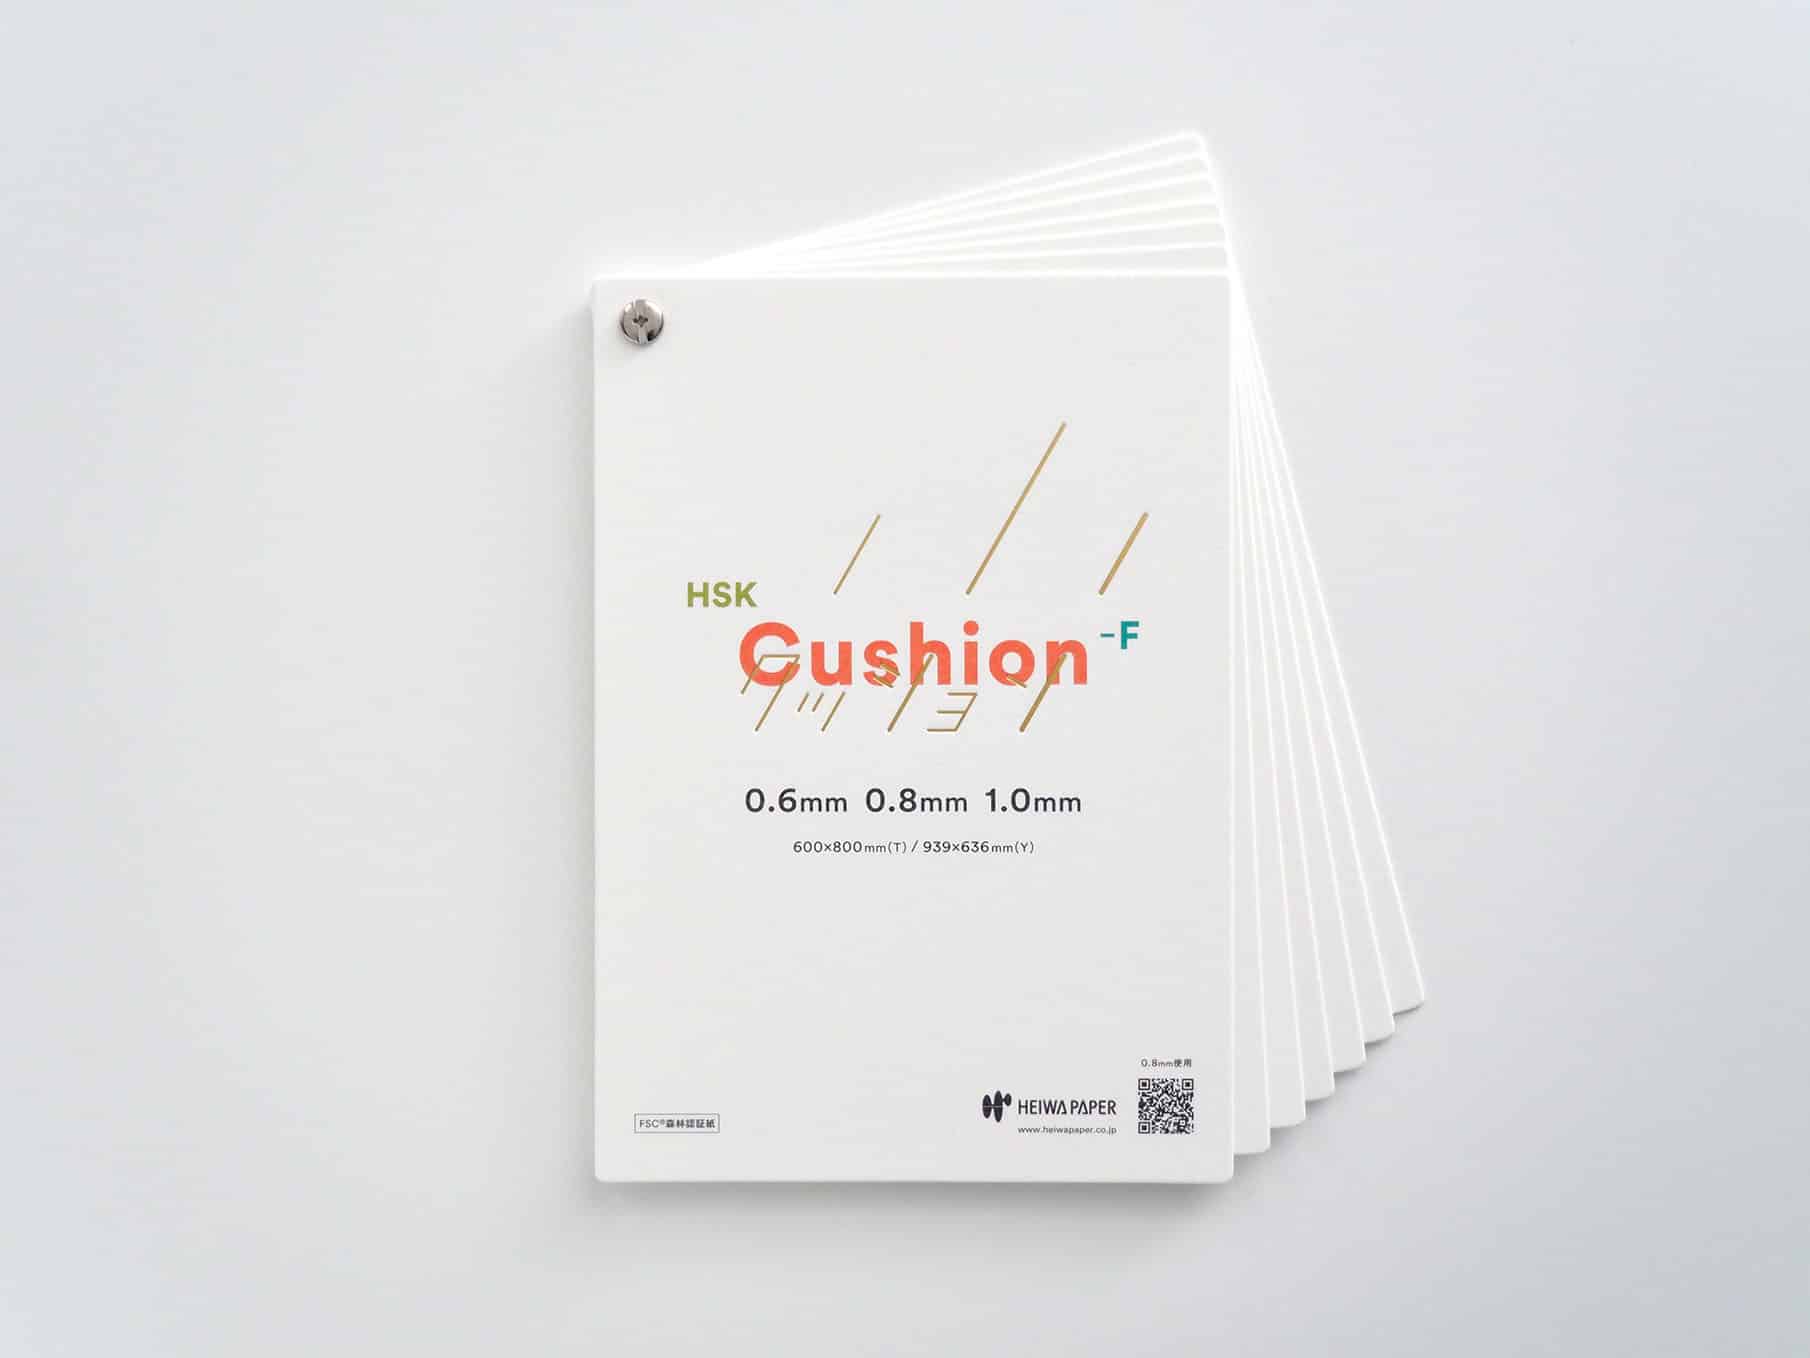 HSK Cushion-F - Promotion Book 1